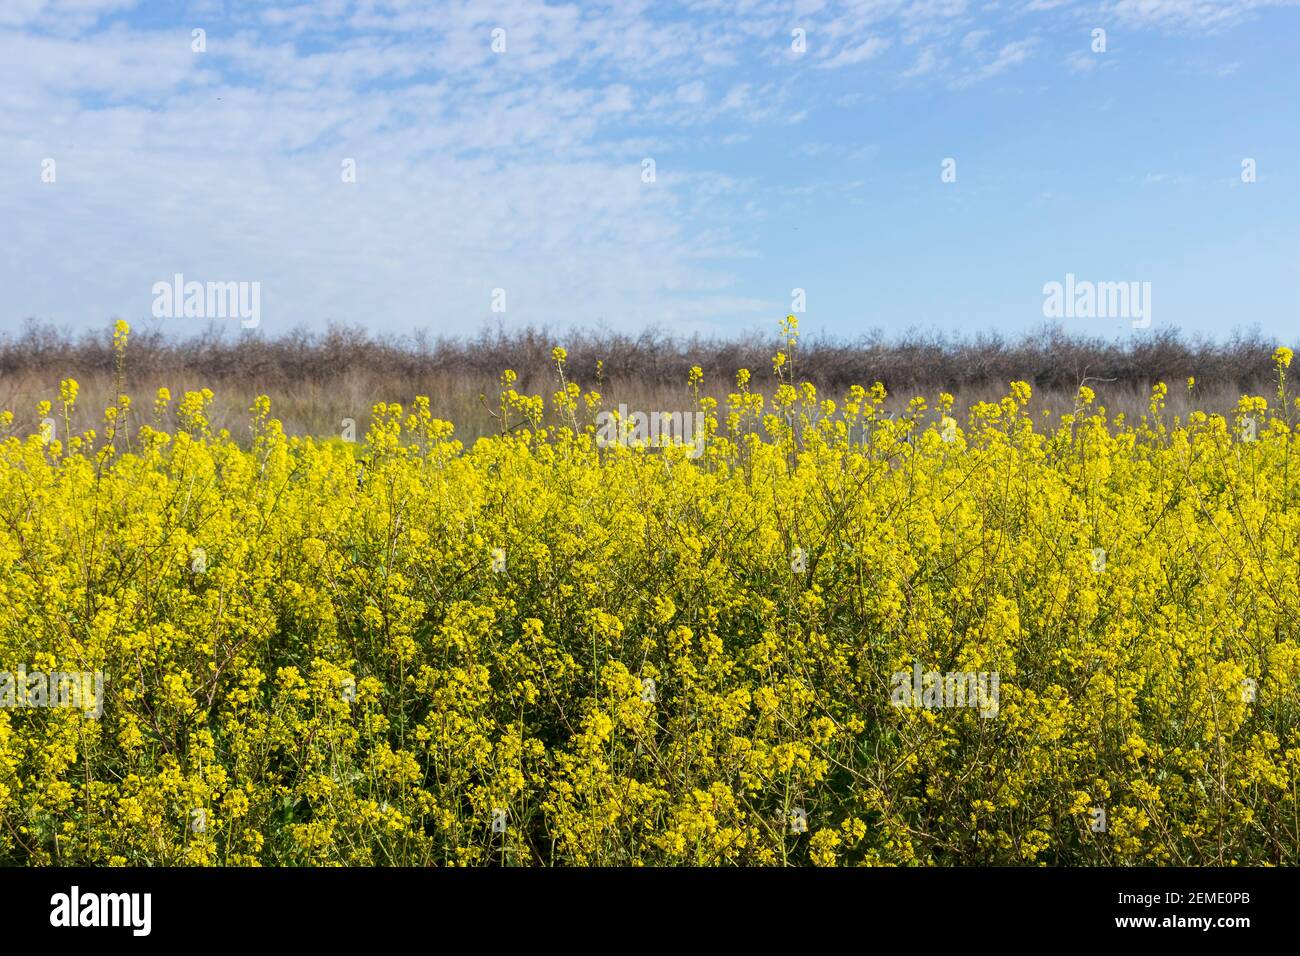 Closeup flowers of Rapeseed, Yellow, Mustard Plant Picture. Israel Stock Photo